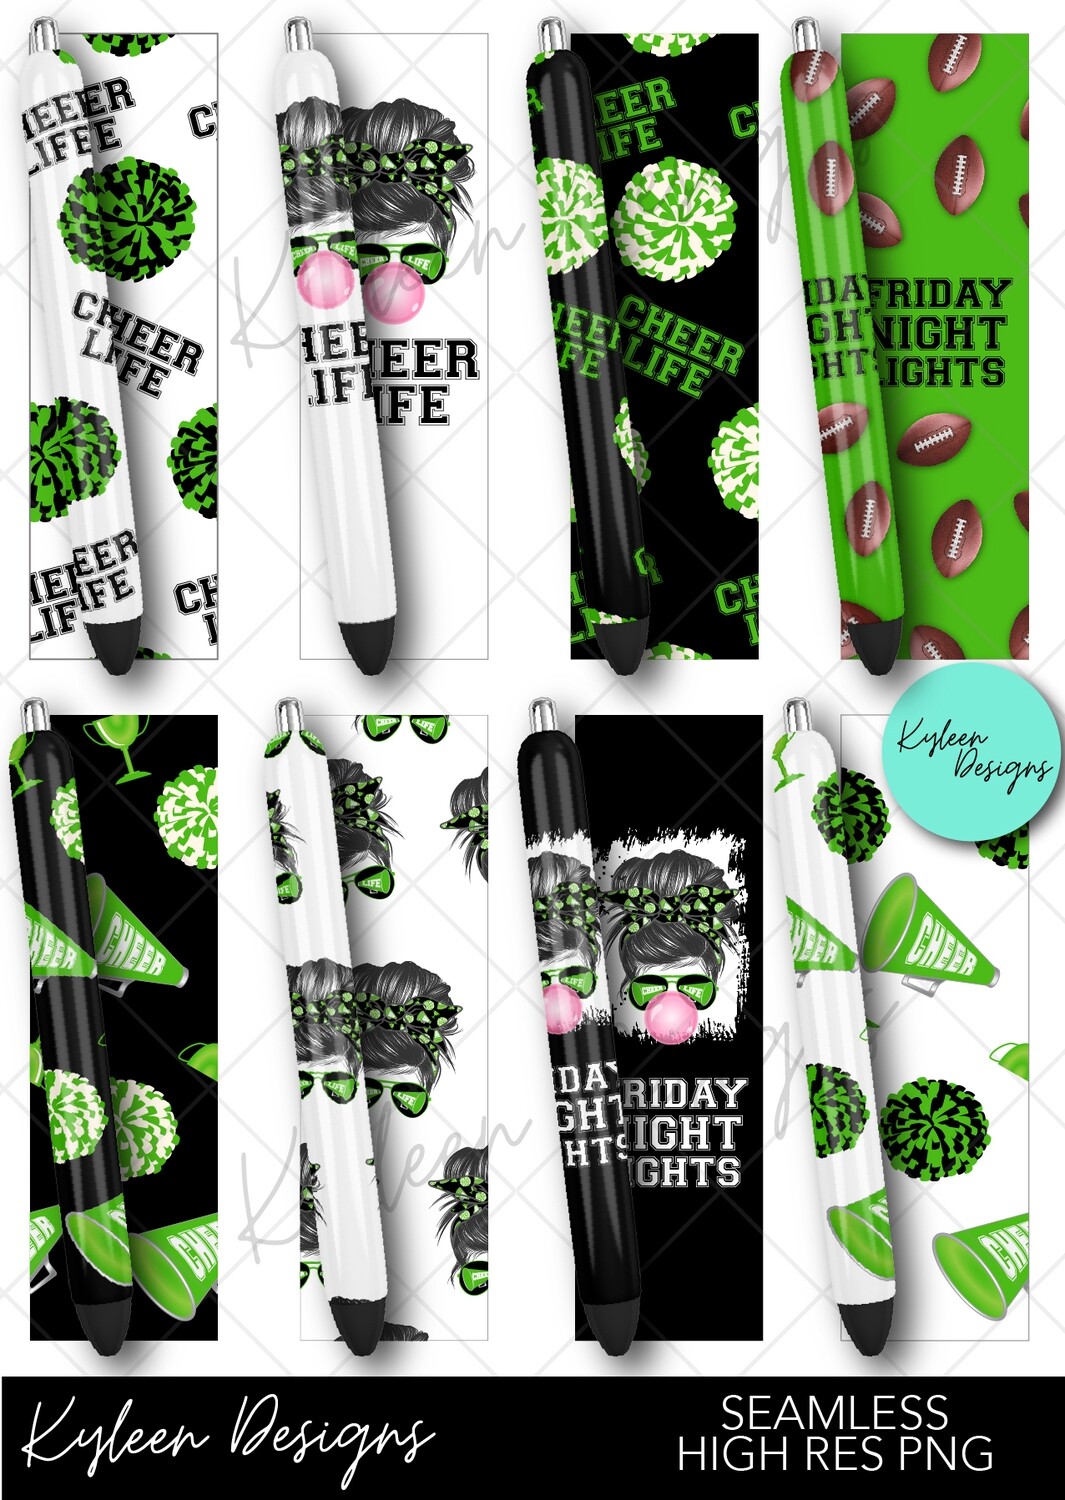 Kelly Green cheer life Friday night lights pen wrappers™  for waterslide High Res PNG file